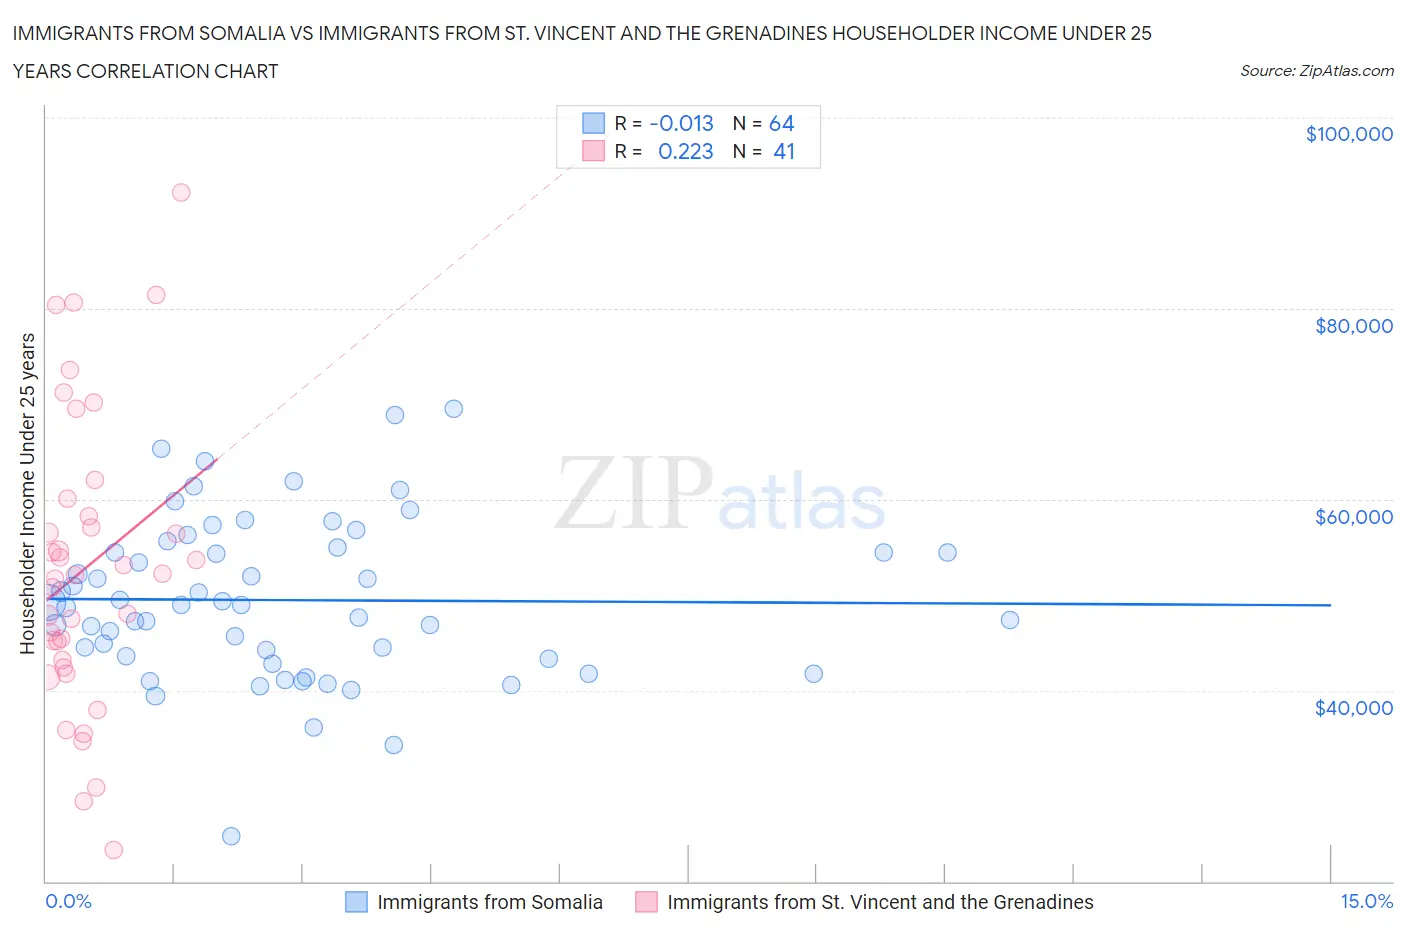 Immigrants from Somalia vs Immigrants from St. Vincent and the Grenadines Householder Income Under 25 years